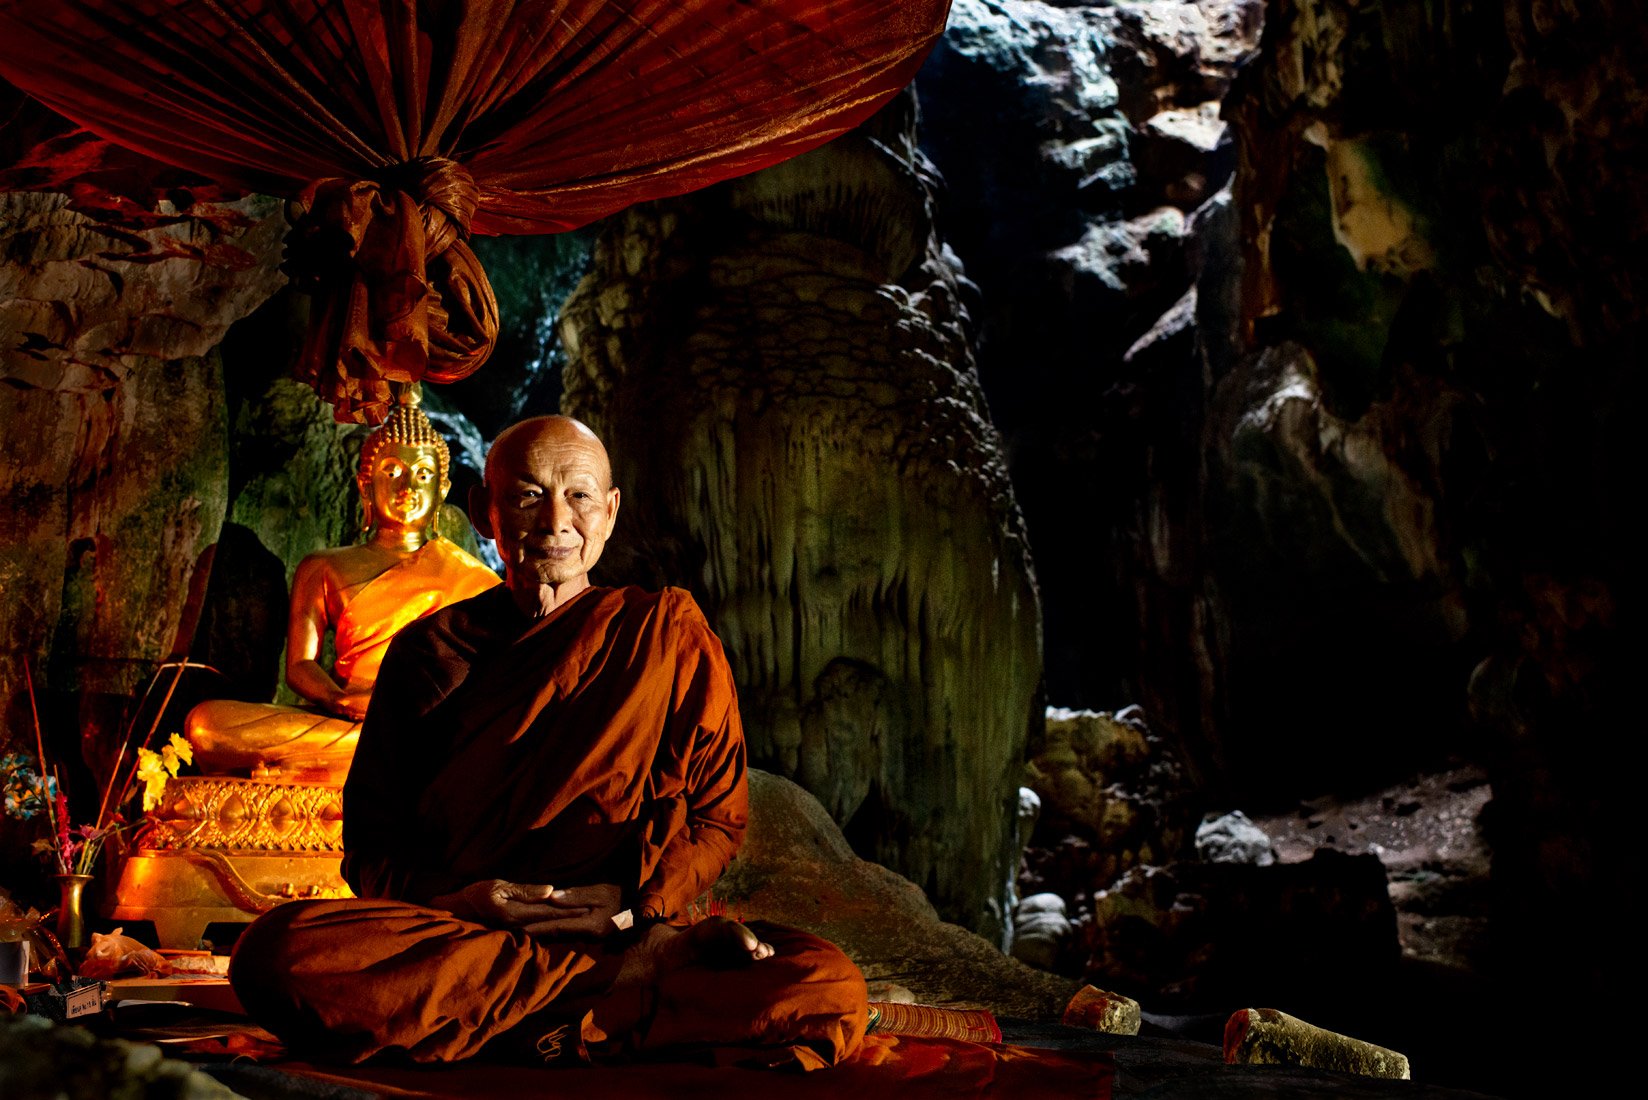 Buddhist monk in a cave on Doi Inthanon, Thailand